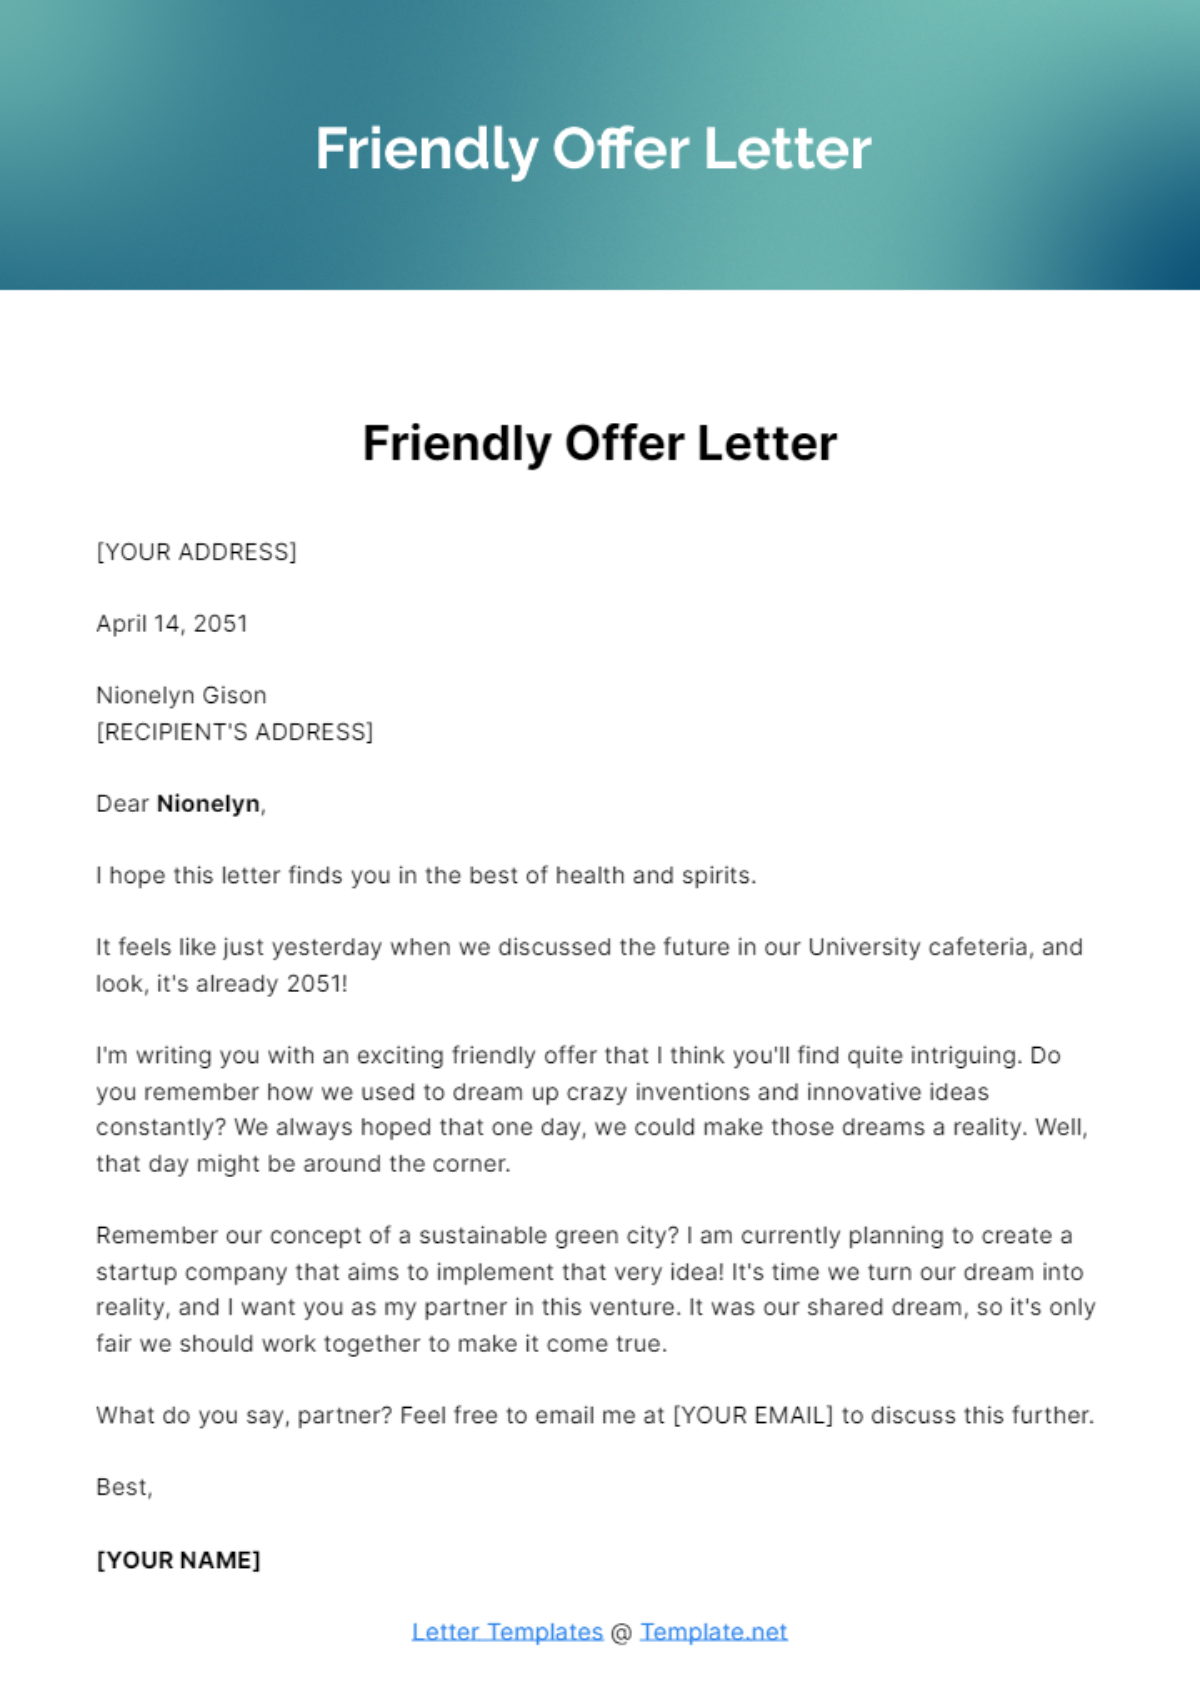 Friendly Offer Letter Template